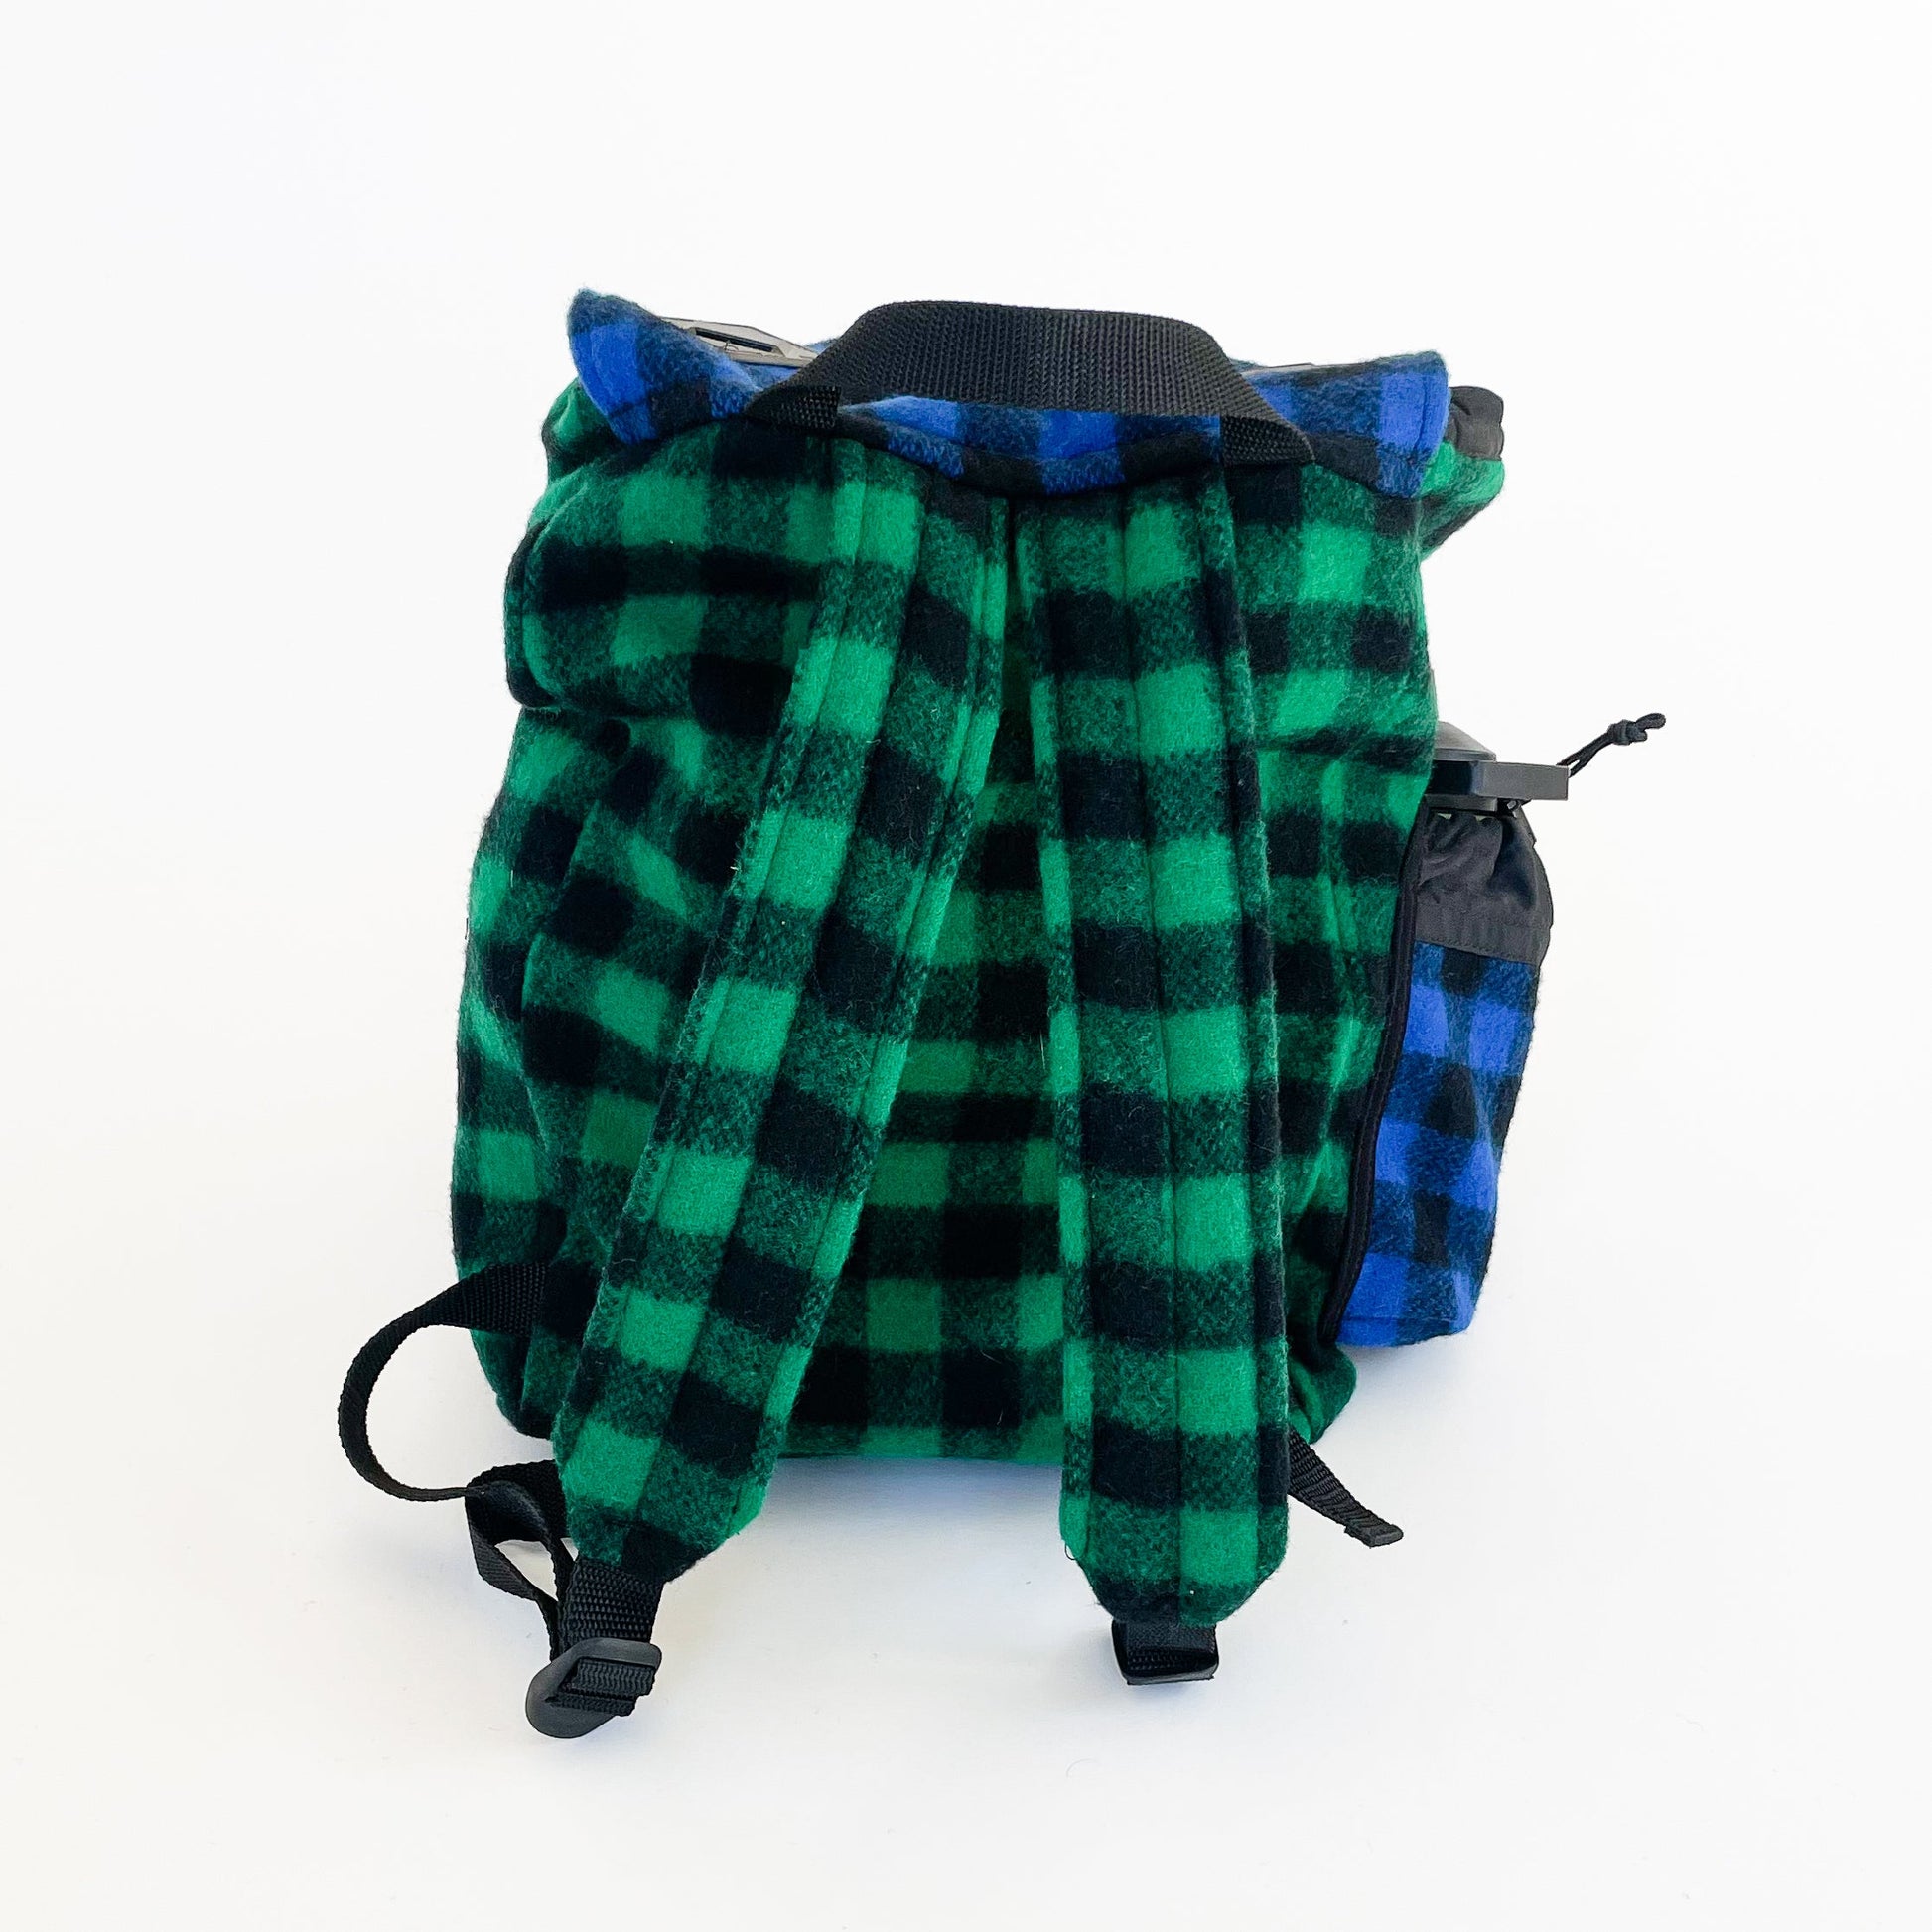 Wool back pack in multi color patchwork - back view